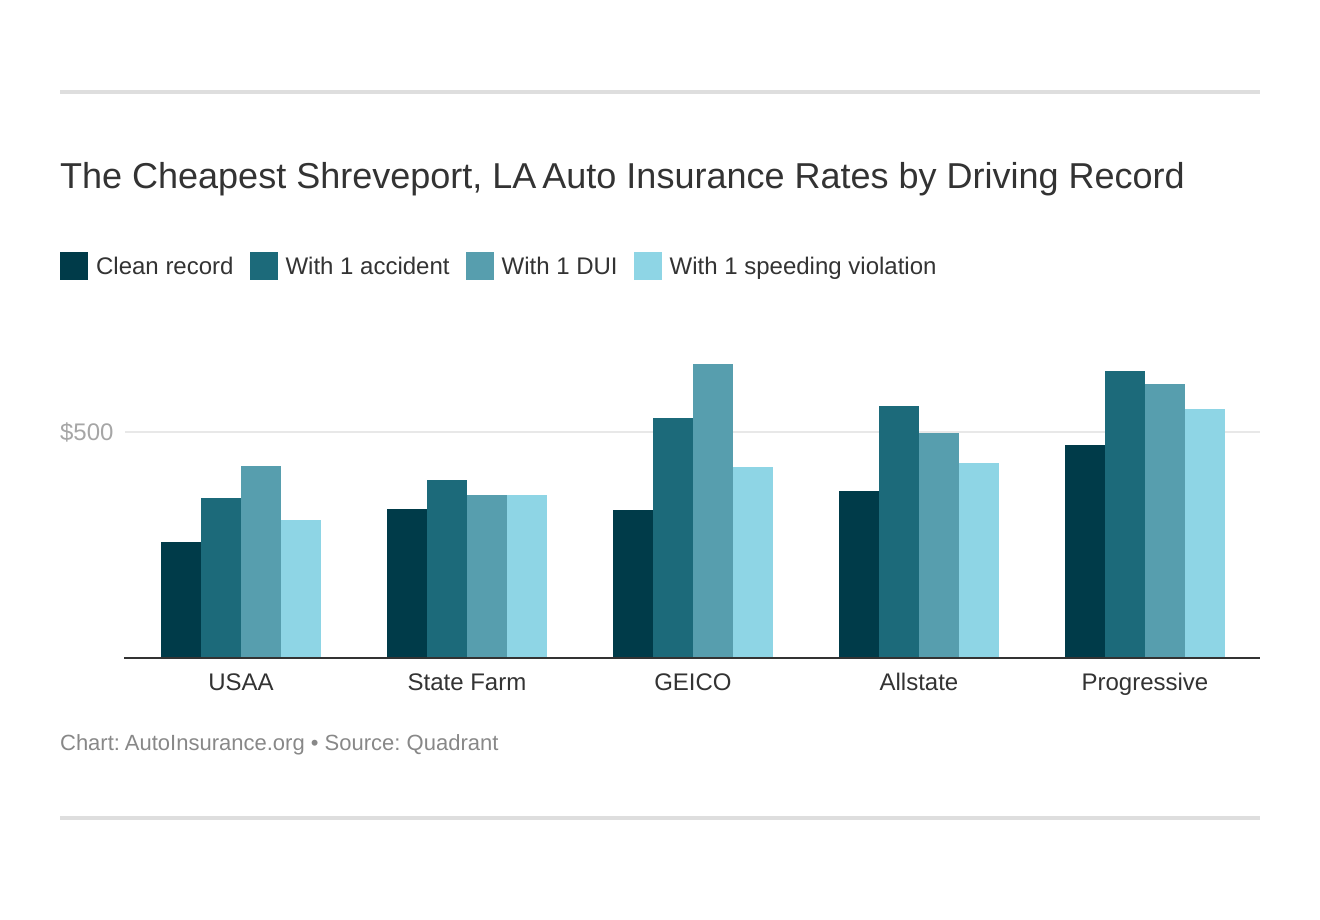 The Cheapest Shreveport, LA Auto Insurance Rates by Driving Record